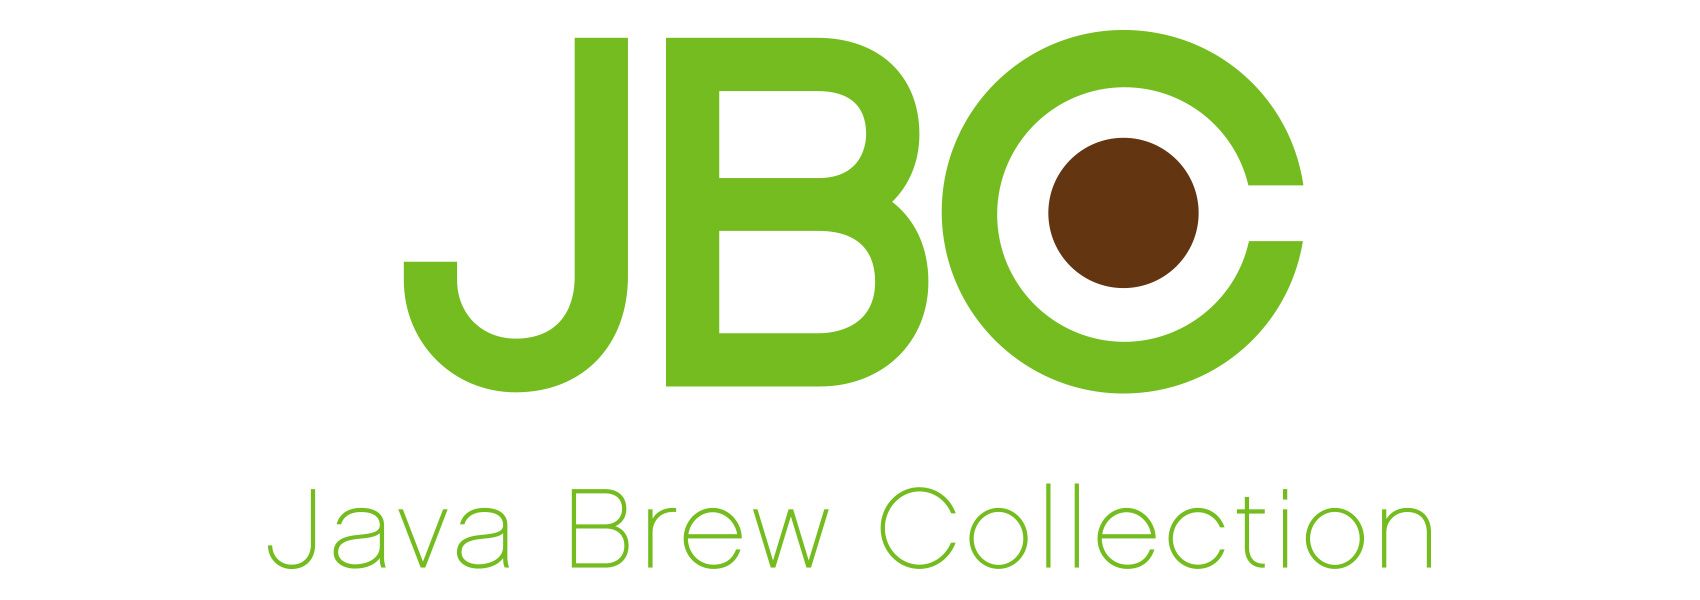 Java Brew Collection